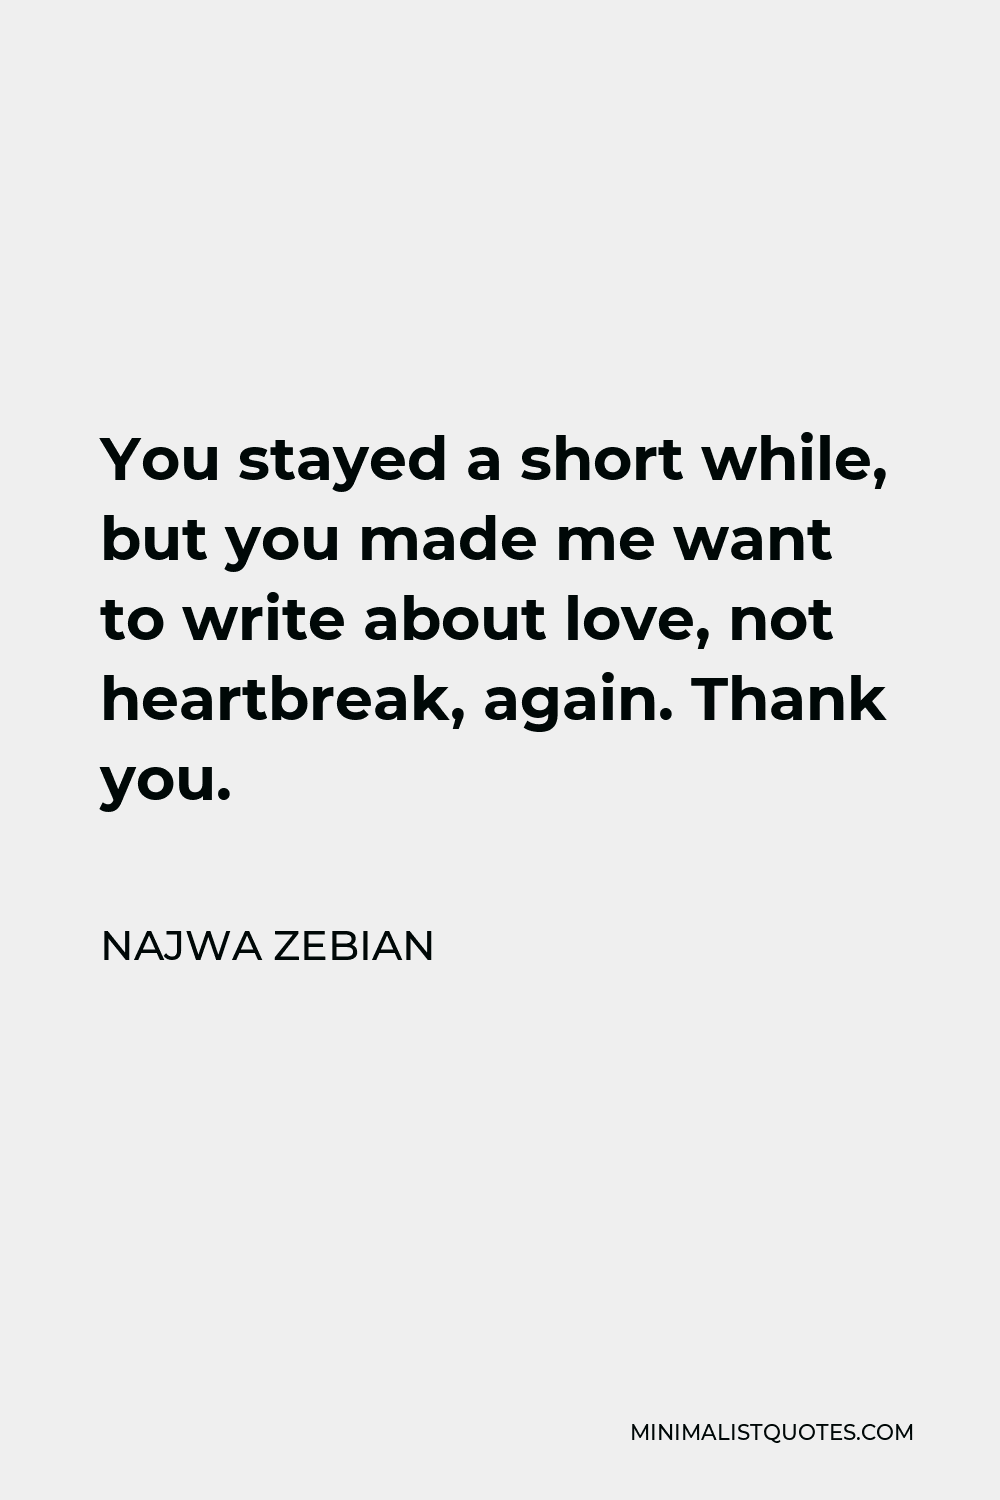 Najwa Zebian Quote - You stayed a short while, but you made me want to write about love, not heartbreak, again. Thank you.